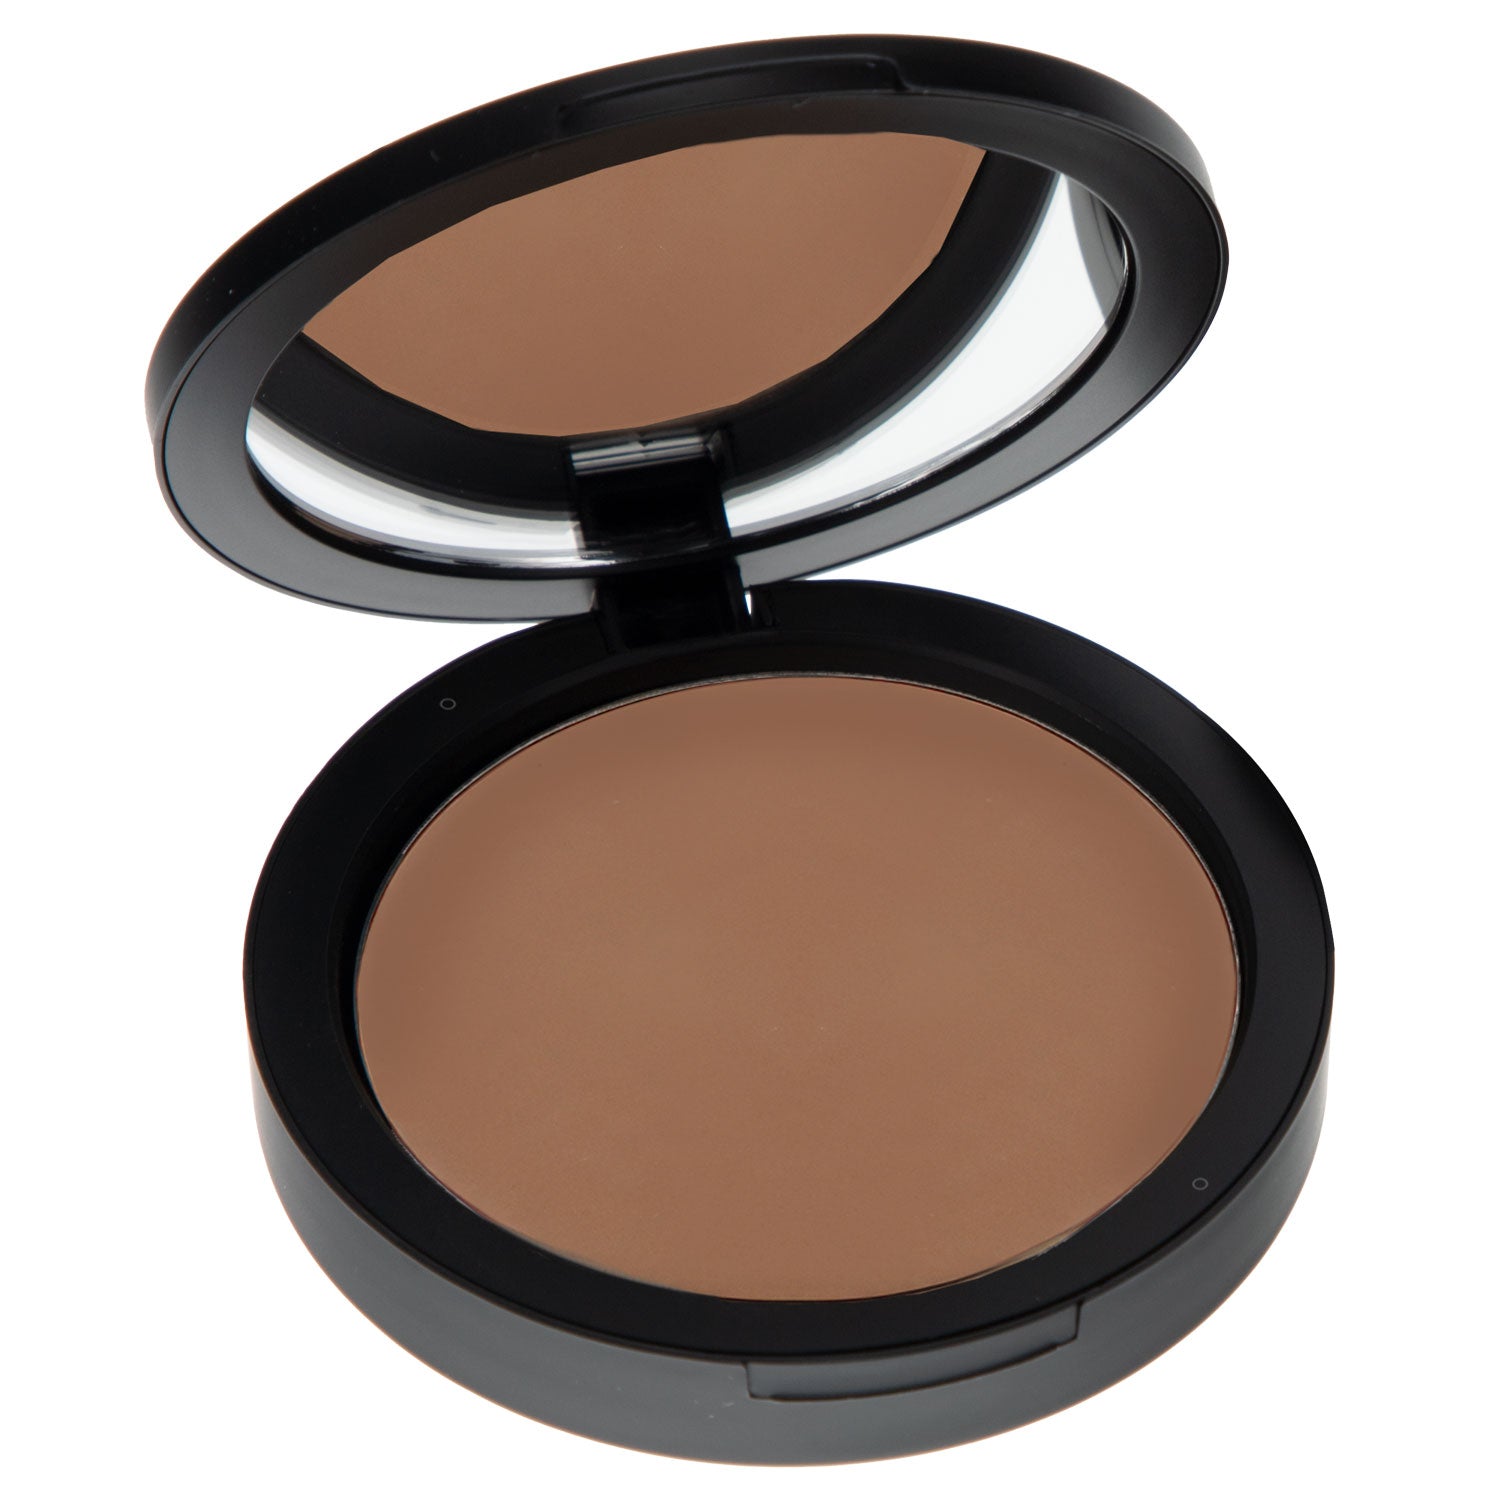 Mineral Based 4-in-1 Product is your PRESSED Powder, Foundation, SPF 15 and Soft Focus Finish All in One! No loose powder mess! Formulated without talc, gluten, phthalates, fragrance, GMO, parabens, or corn. PUDDIN' (Dark) - For darker complexions.